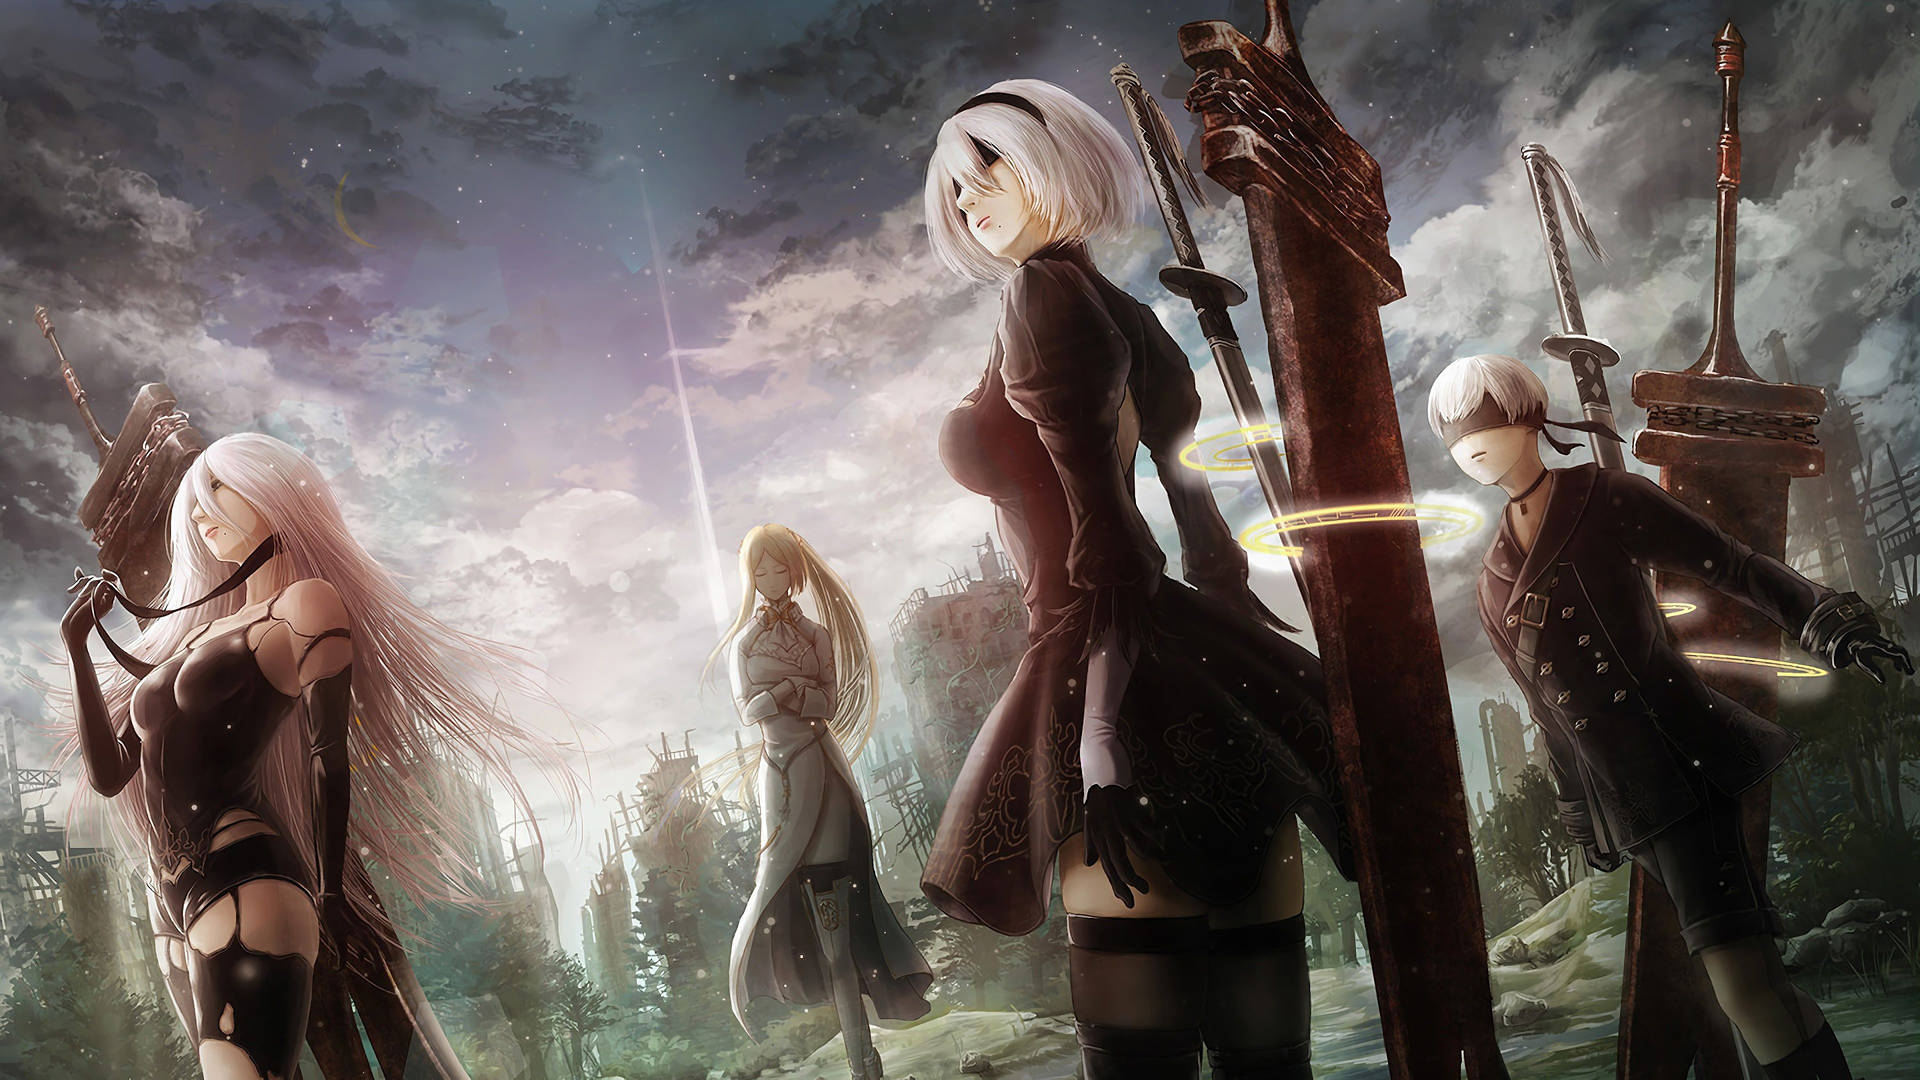 Nier Automata 2b, 9s, A2 And The Commander Background